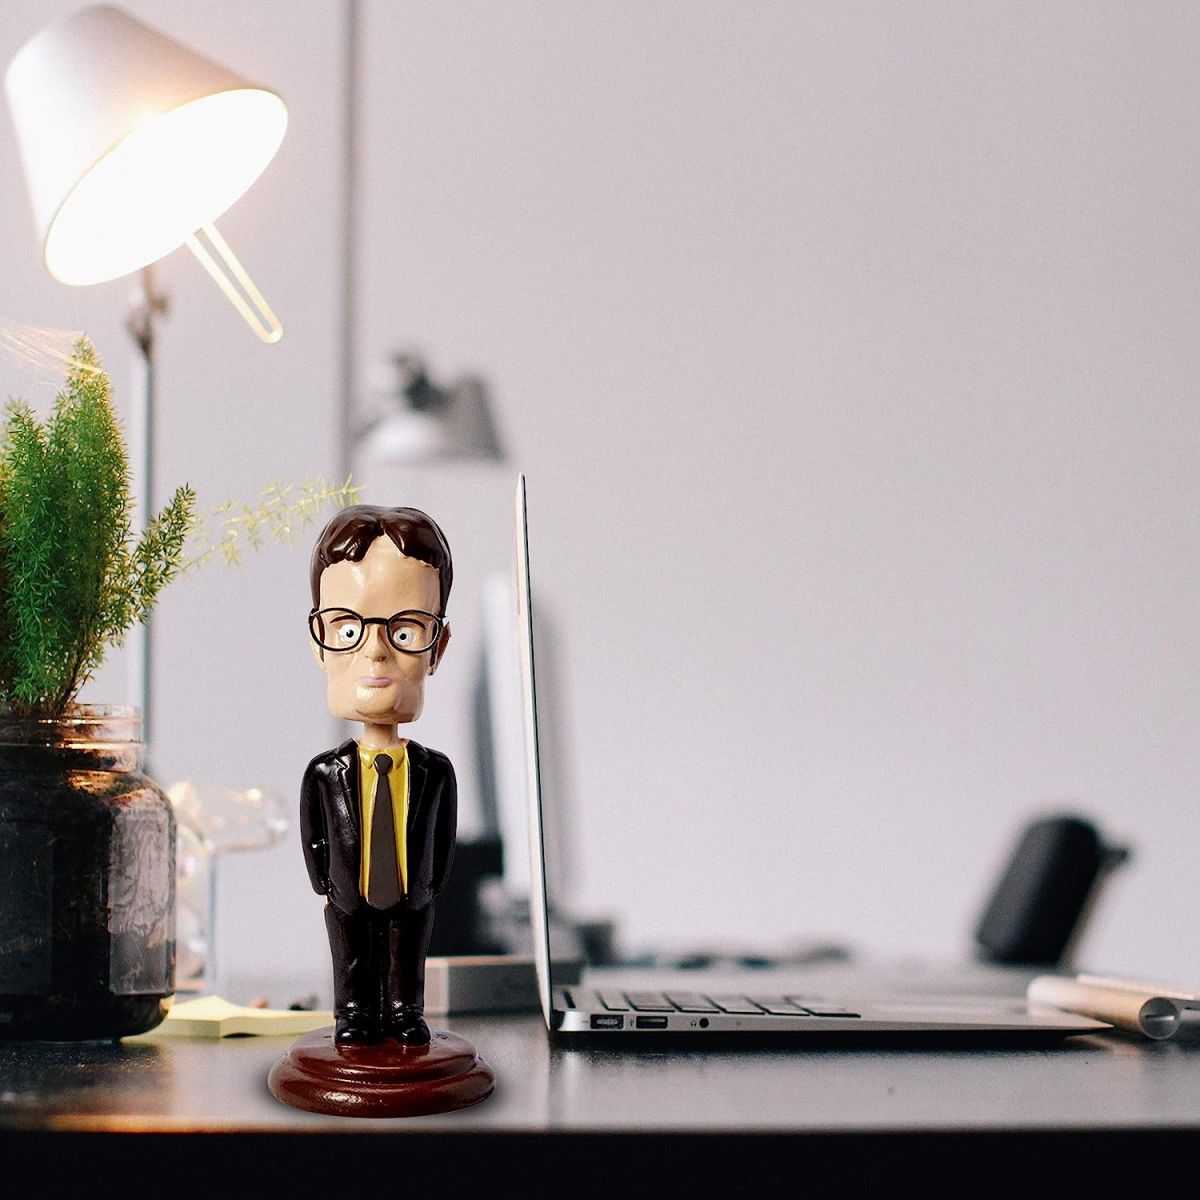 The Office: Dwight Schrute Bobblehead - Dunder Mifflin Bobble Head Figure - Funny Merch & Memorabilia - Novelty Car Dashboard Statue - TV Show Collectible Figures - Stunned Mind